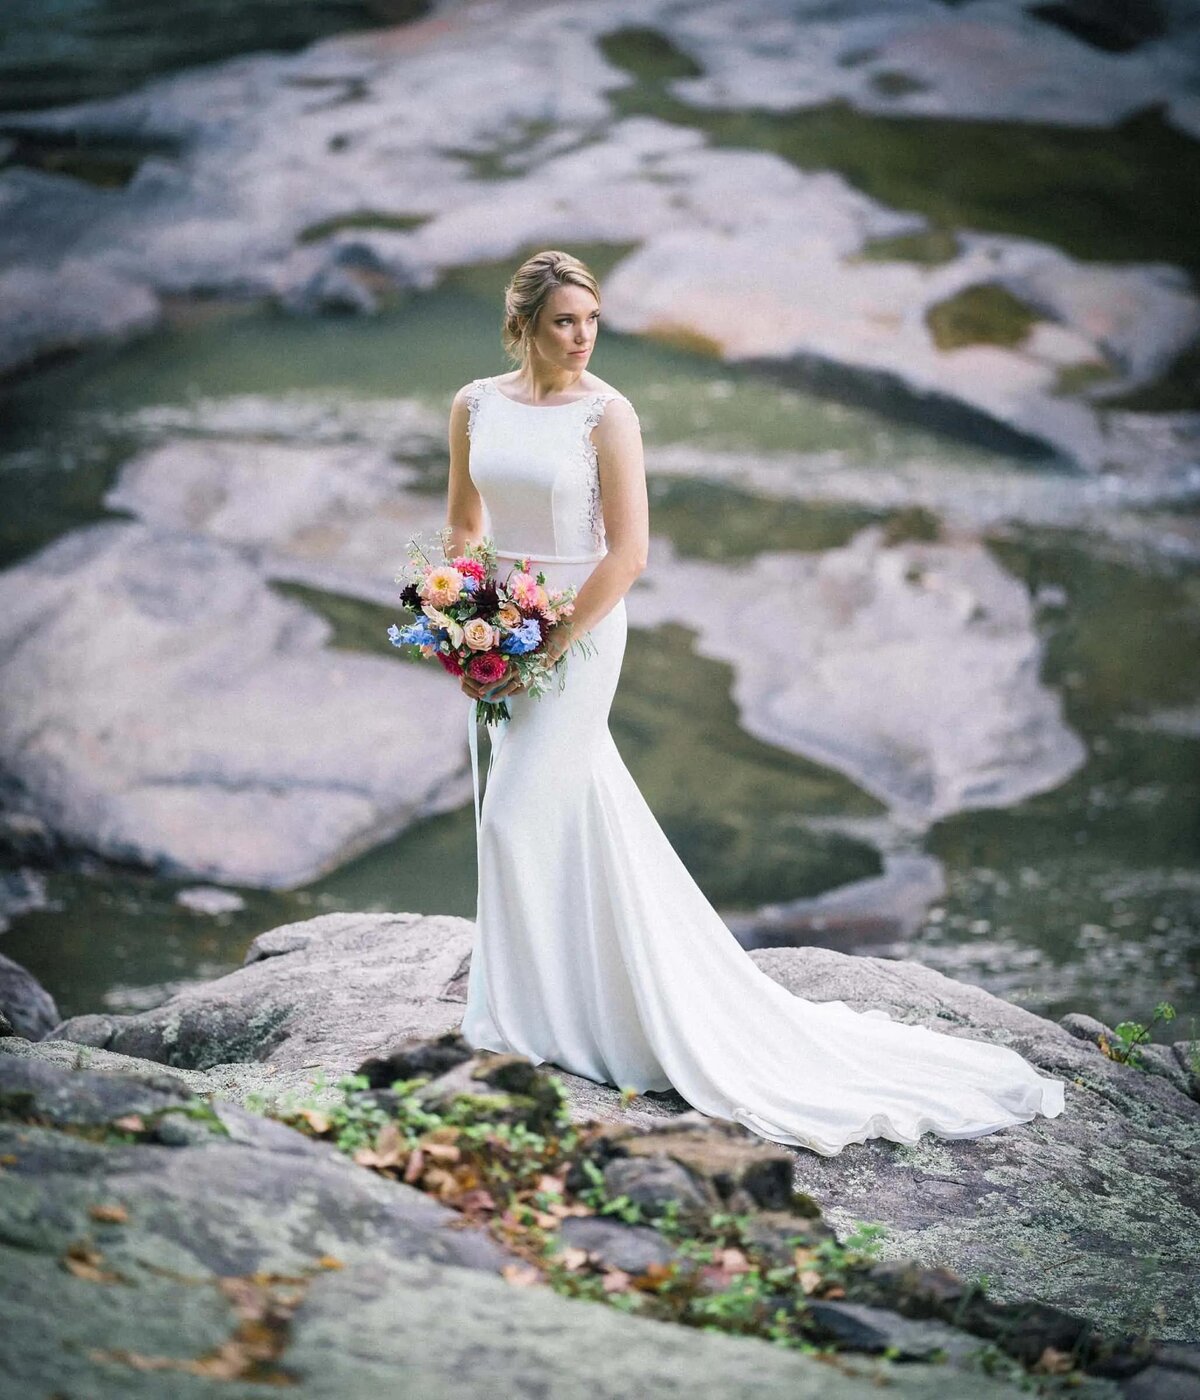 A bride smiling standing on a rocky overlook holding a bouquet